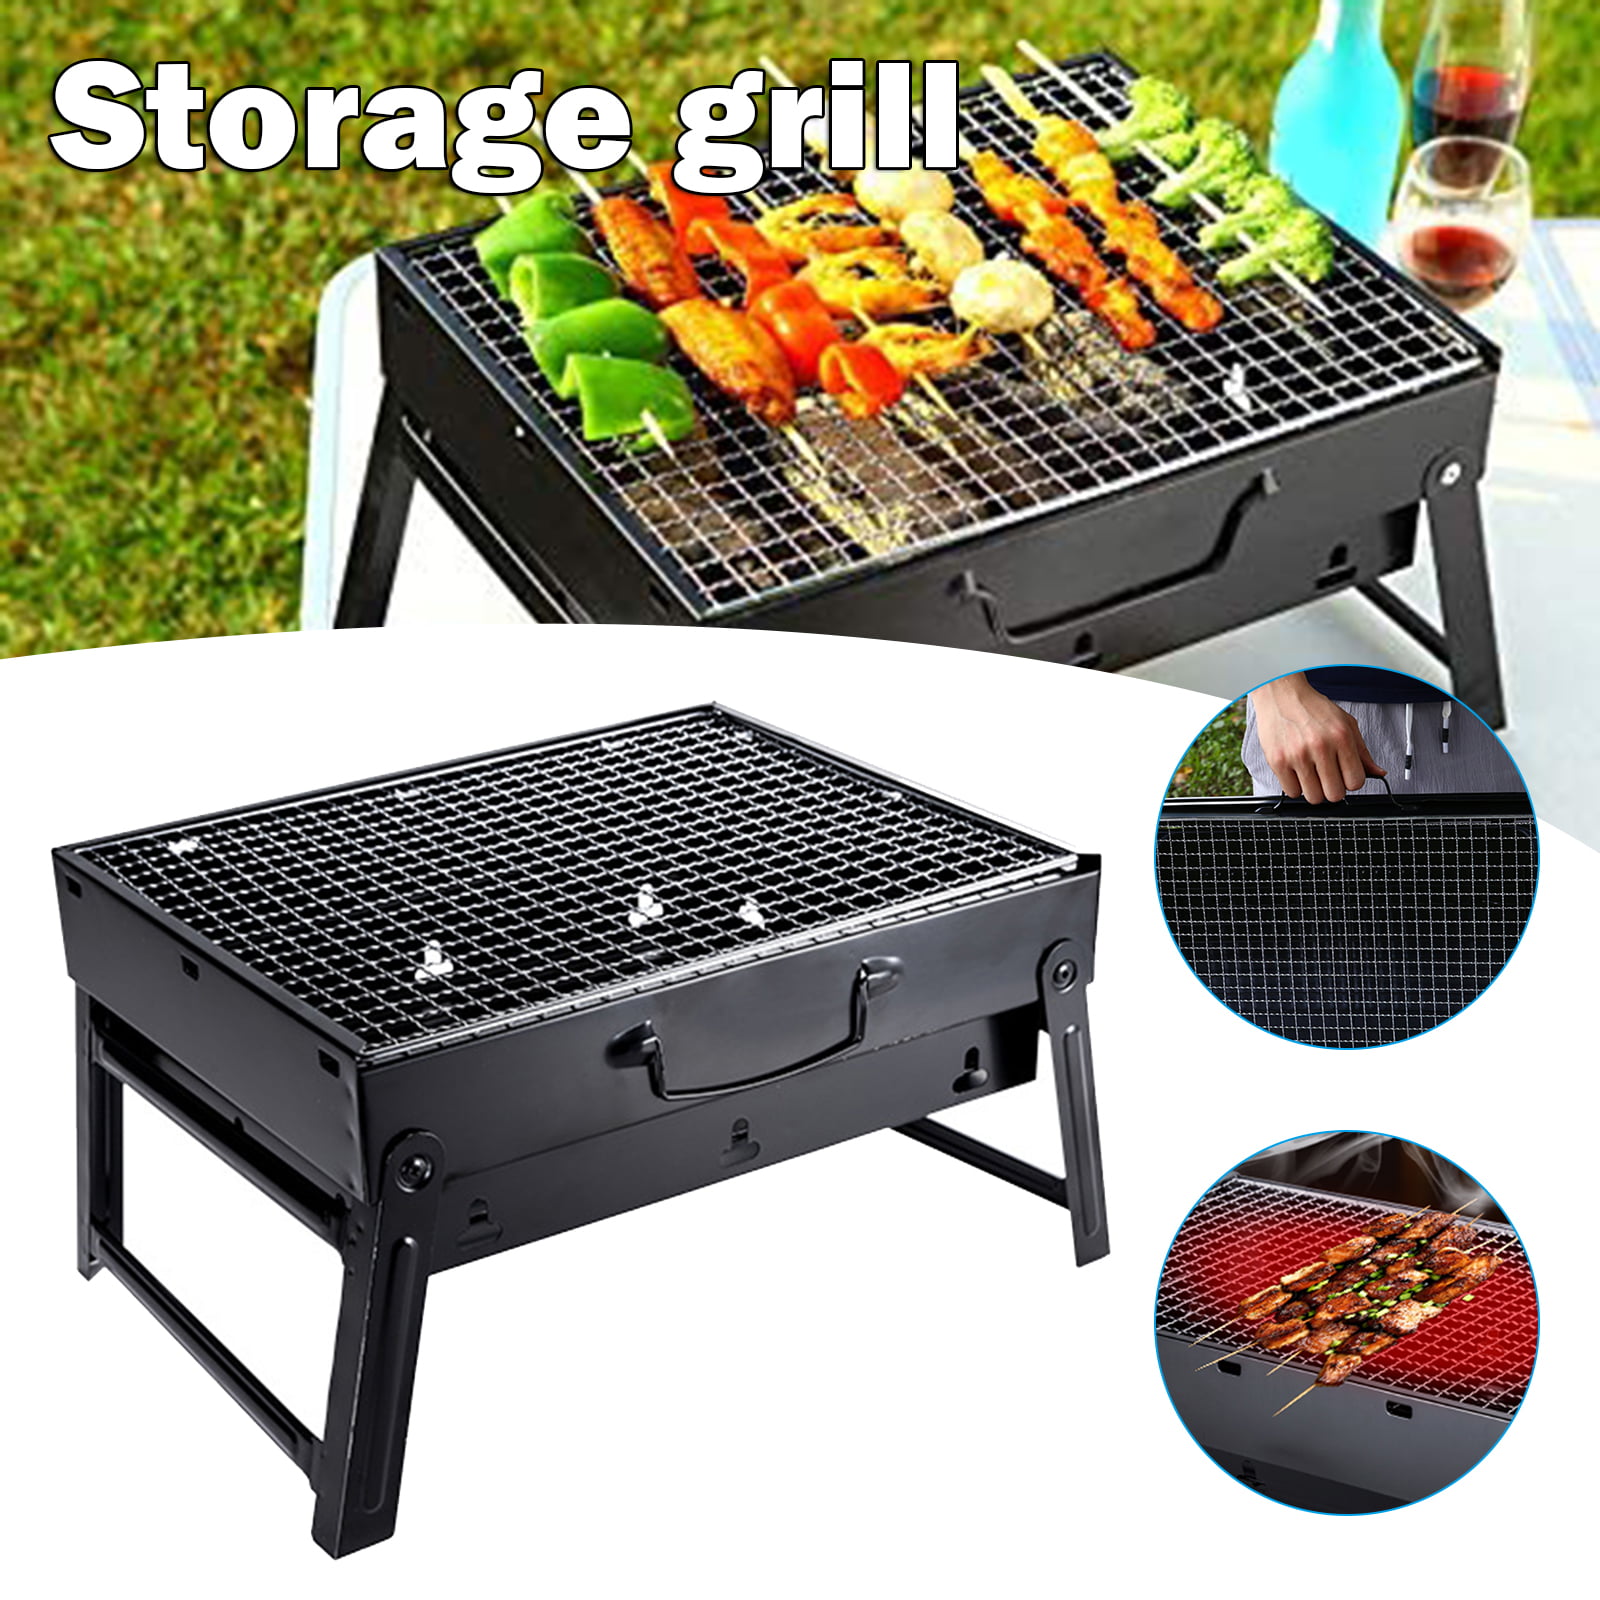 Folding BBQ Barbecue Grill Portable Outdoor Camping Charcoal Kabob Stove Burner 